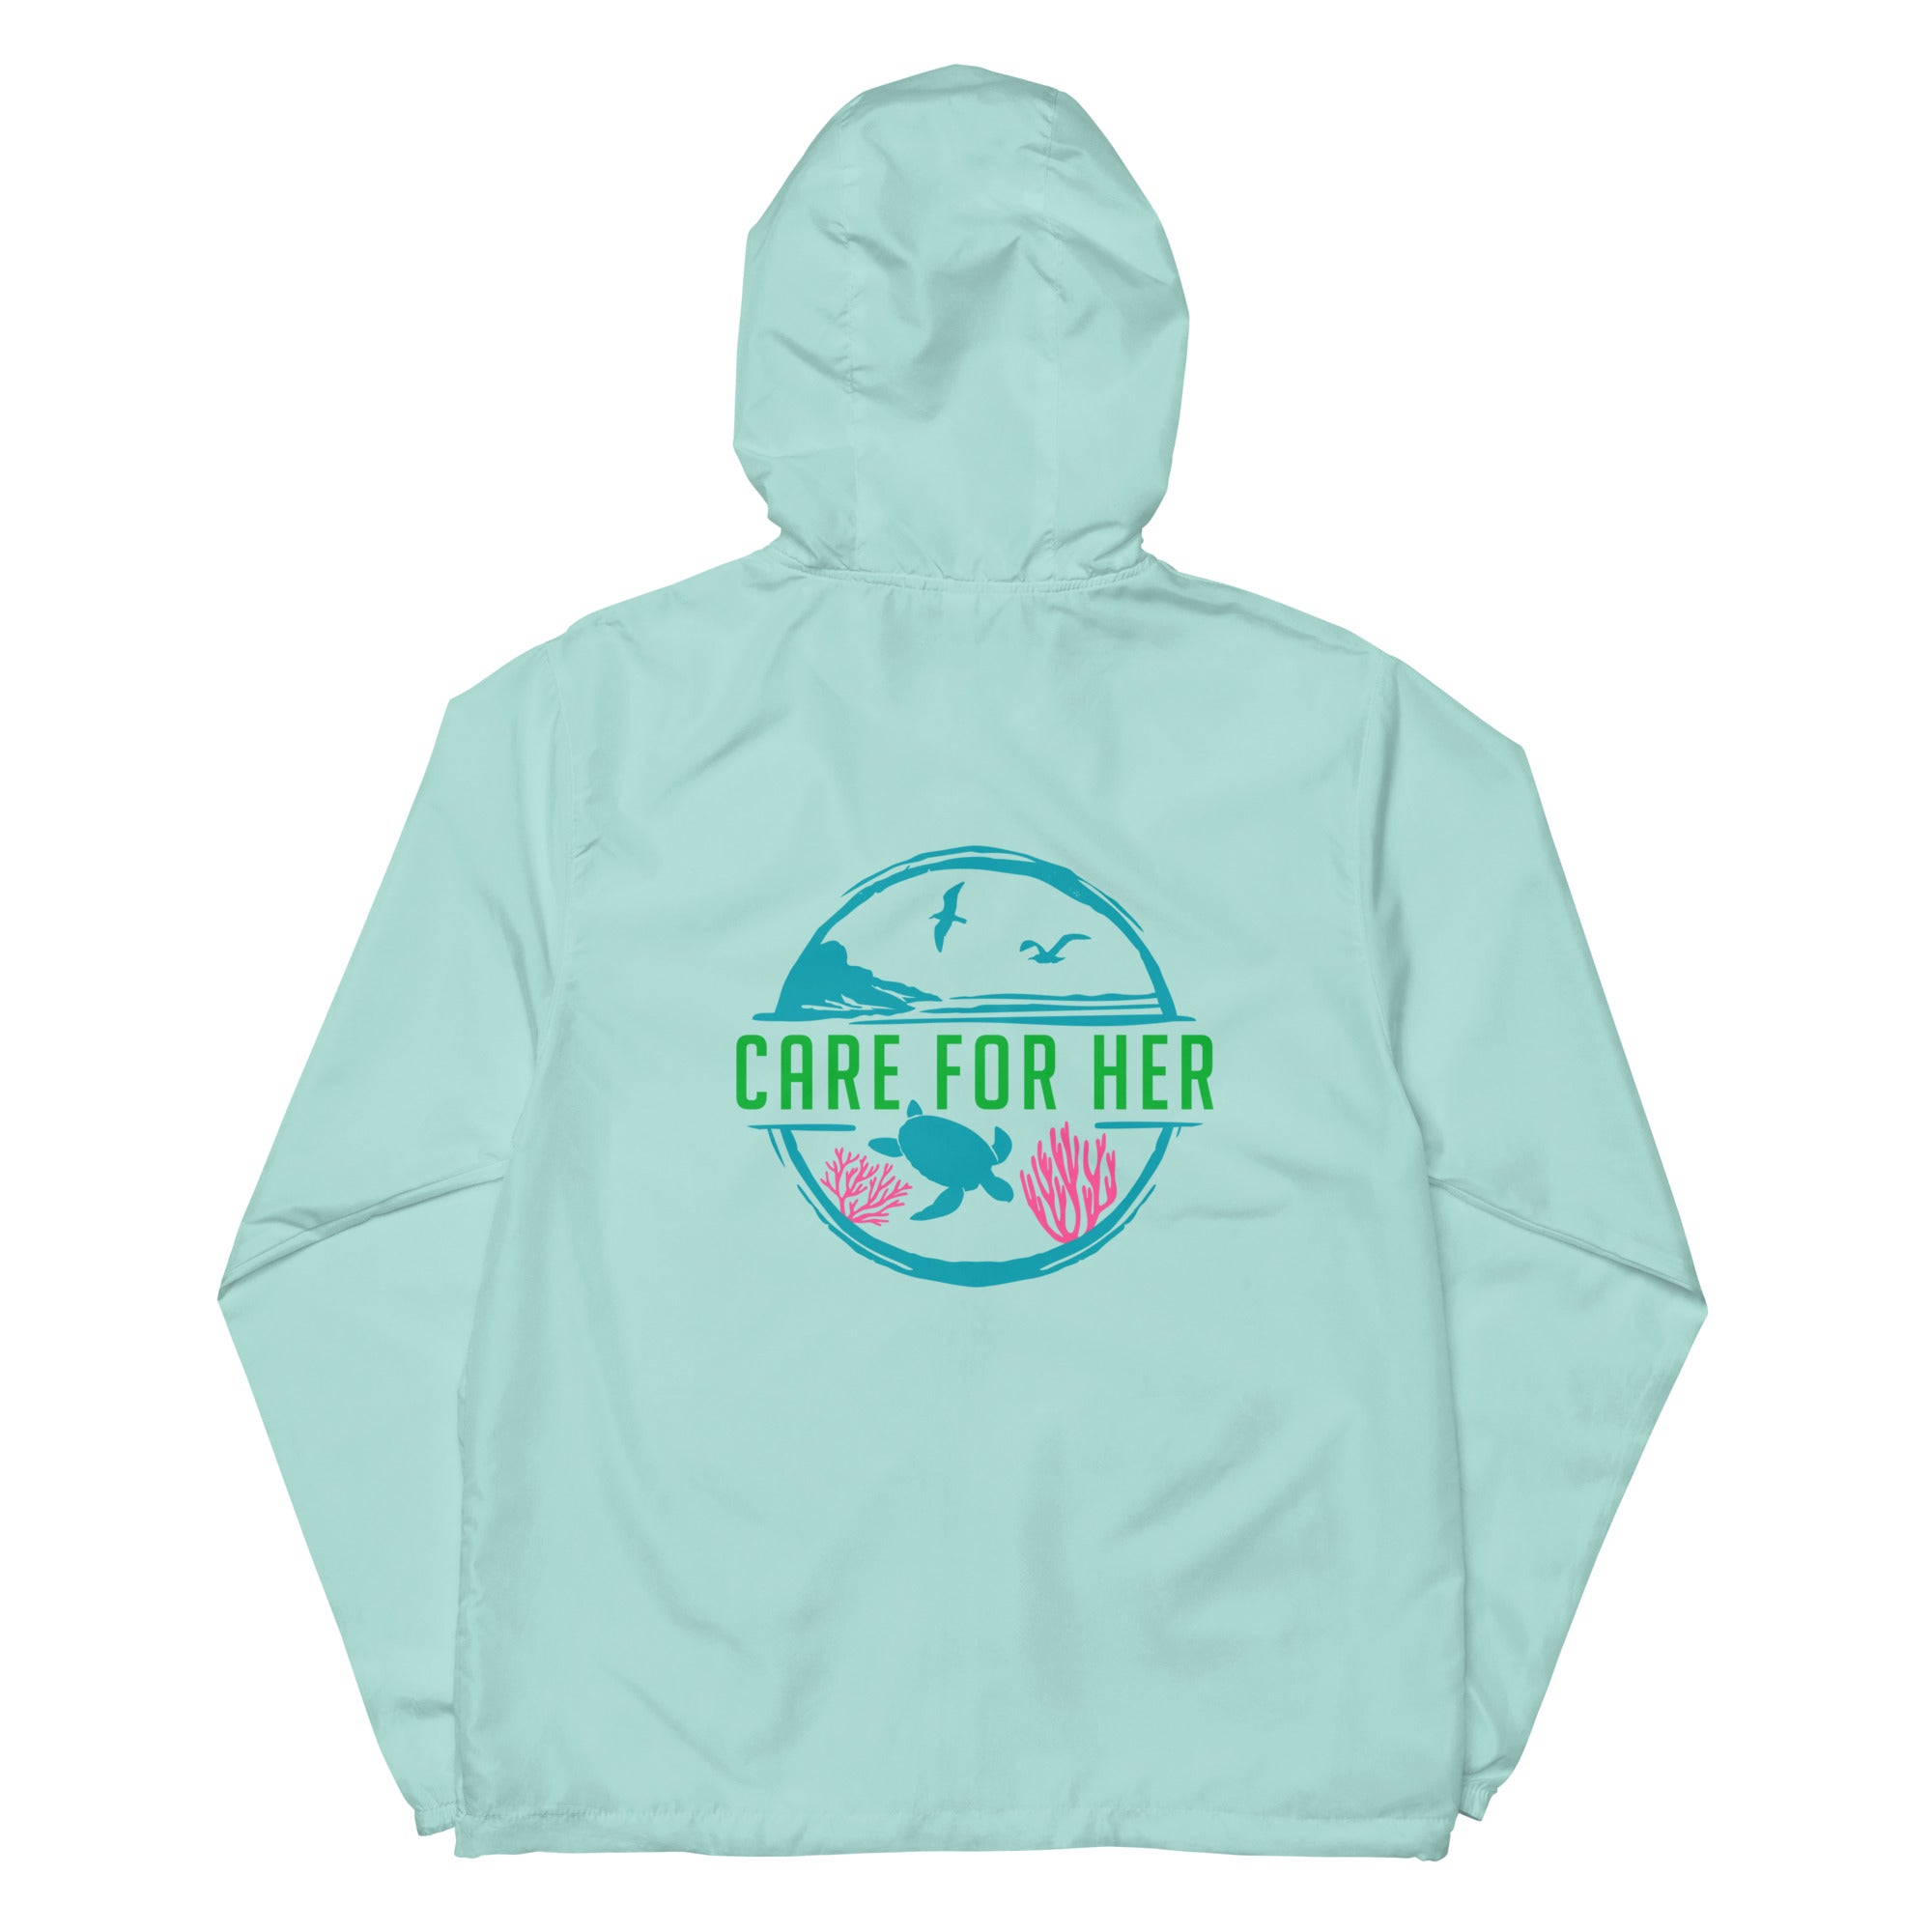 Care for Planet Earth Against Climate Change Unisex Lightweight Zip Up Windbreaker